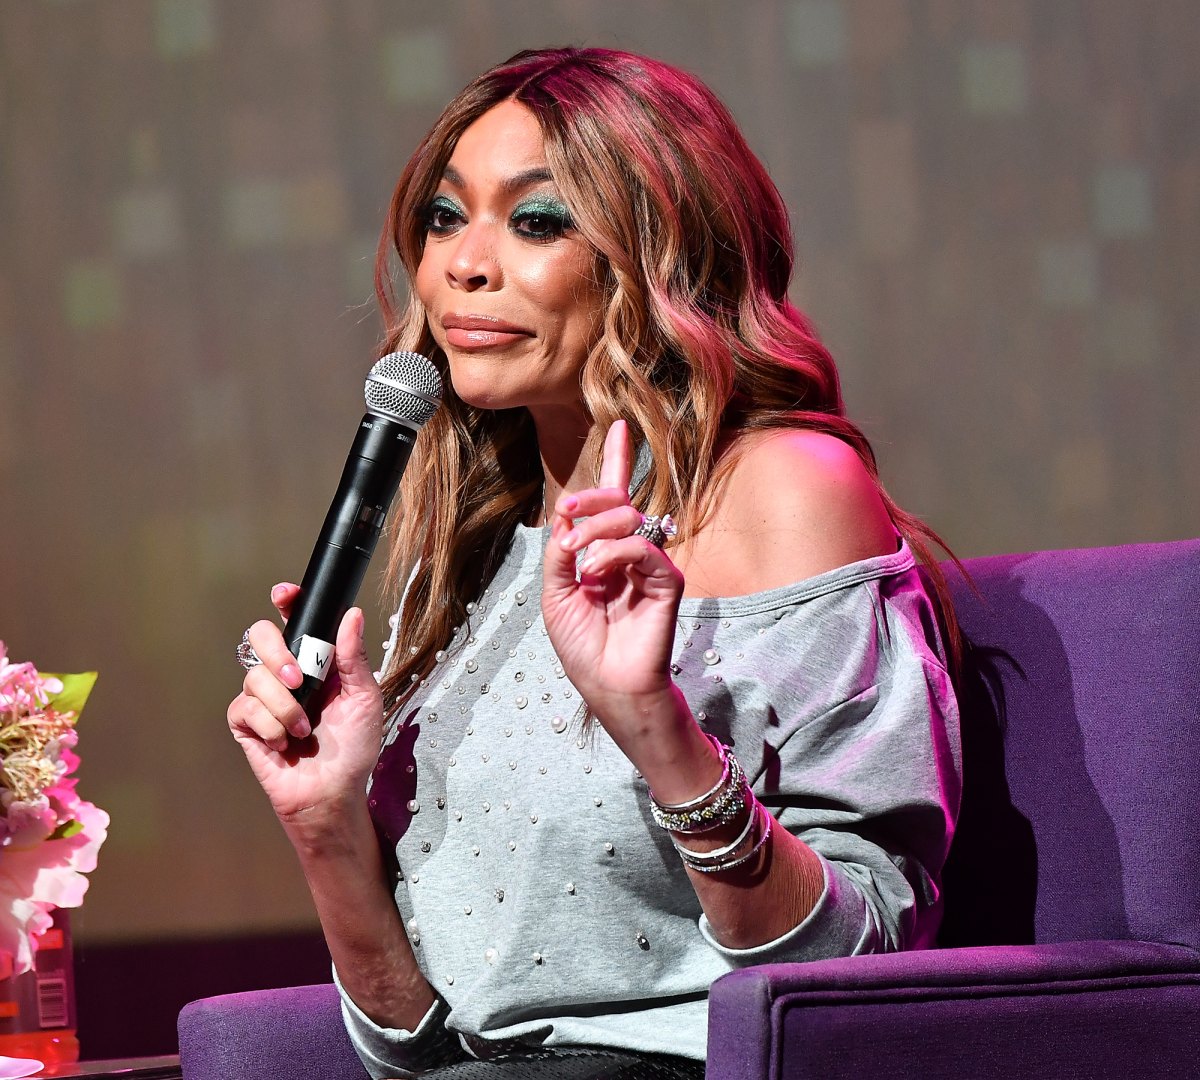 Wendy Williams’ Health and Personal Struggles Through the Years